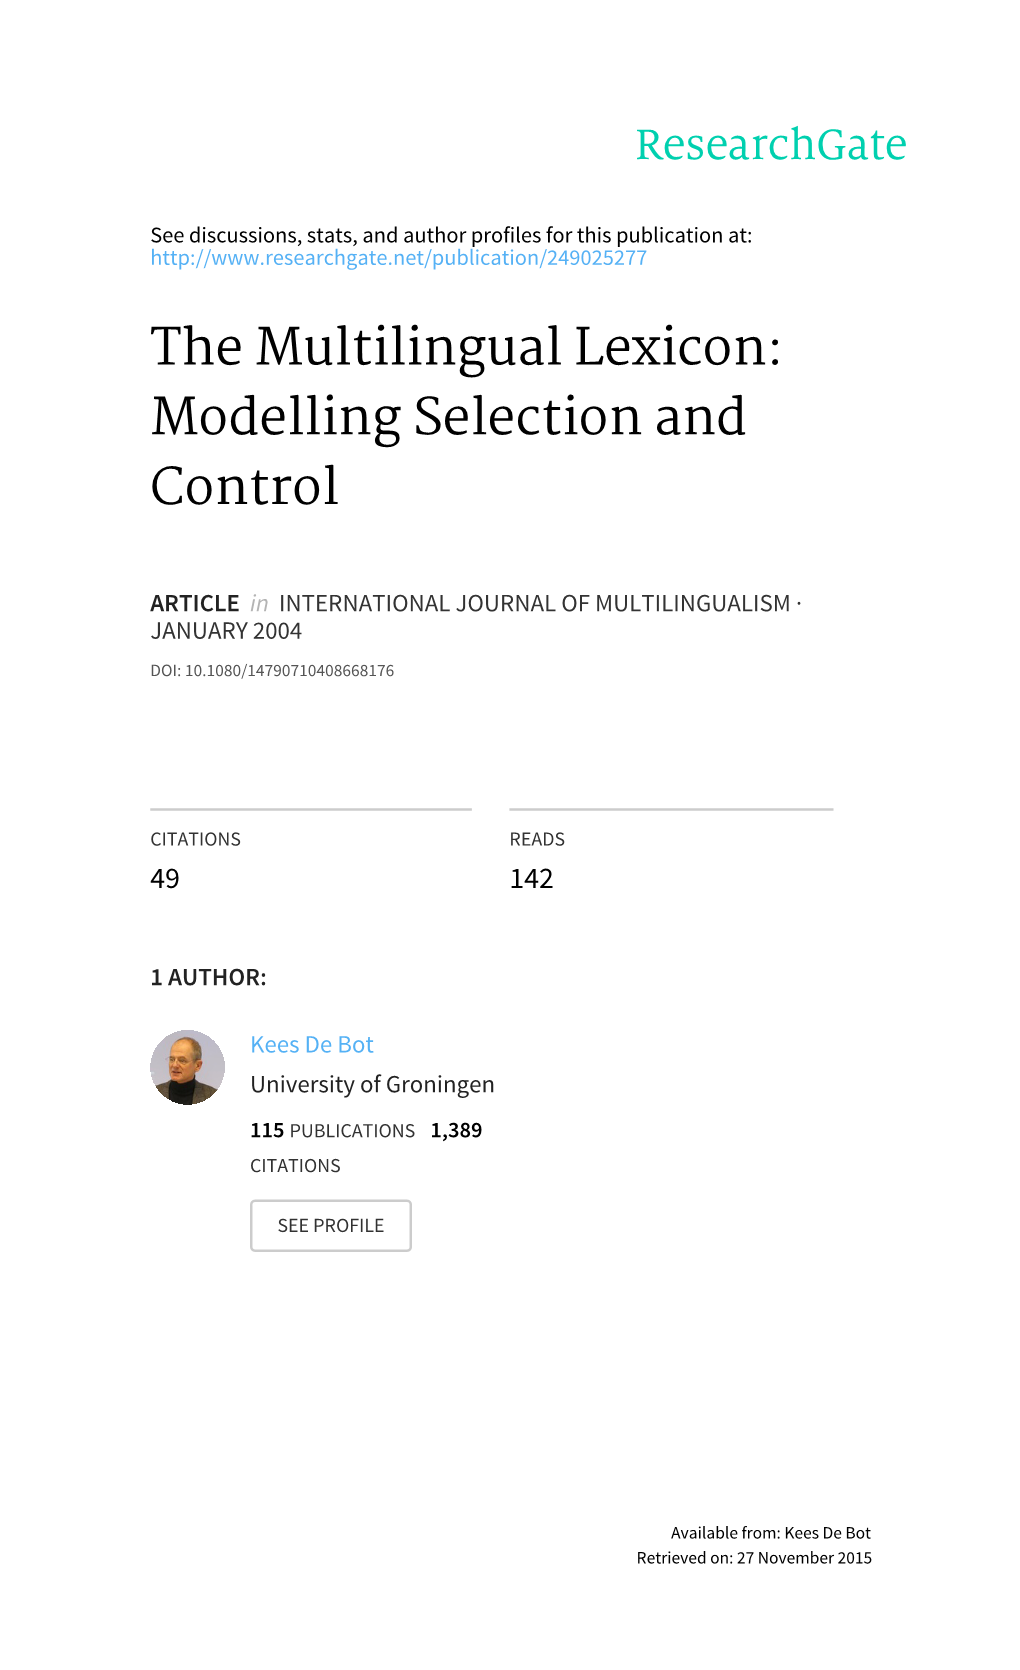 The Multilingual Lexicon: Modelling Selection and Control